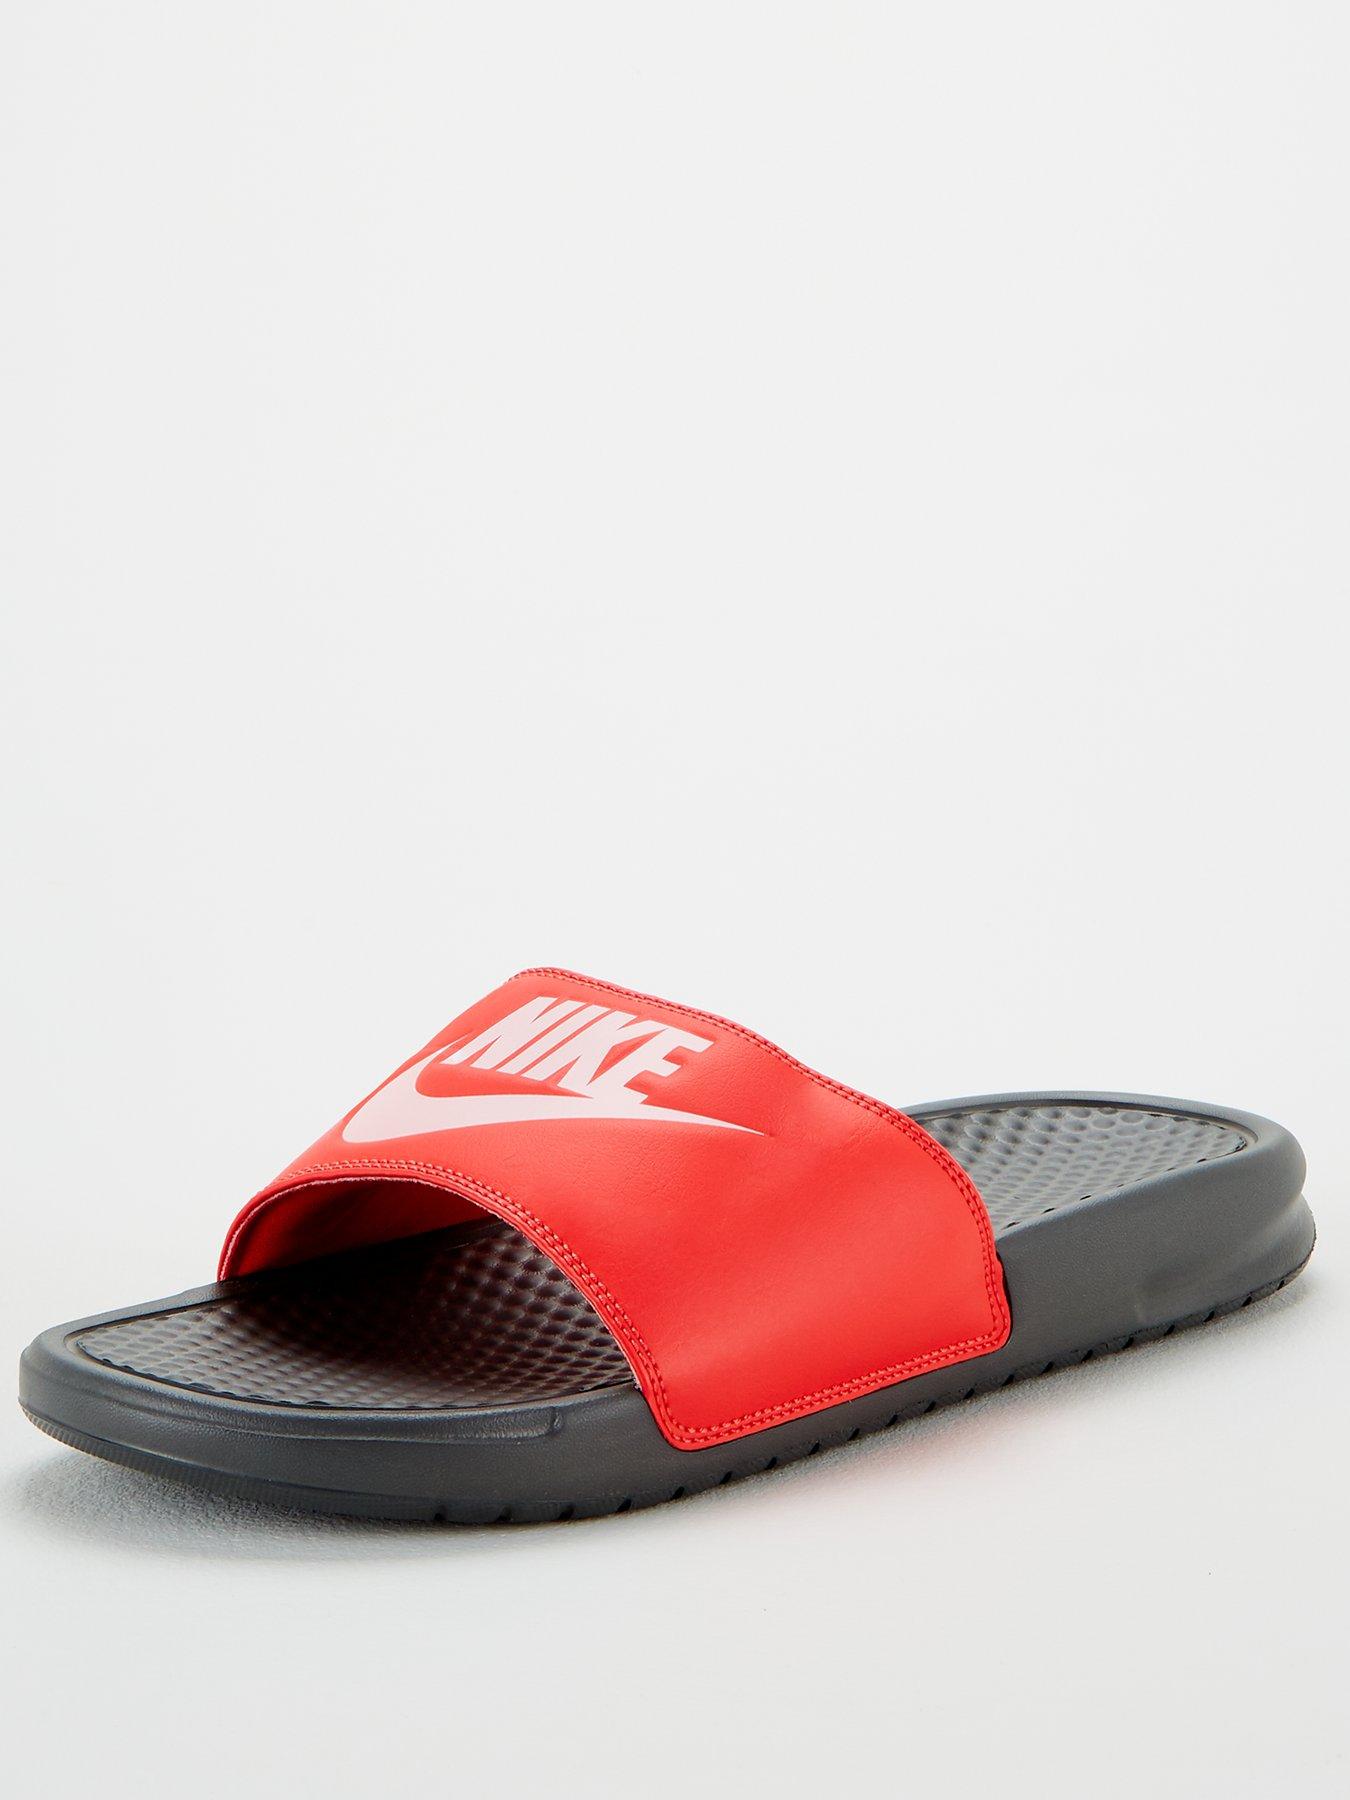 red and black nike sandals